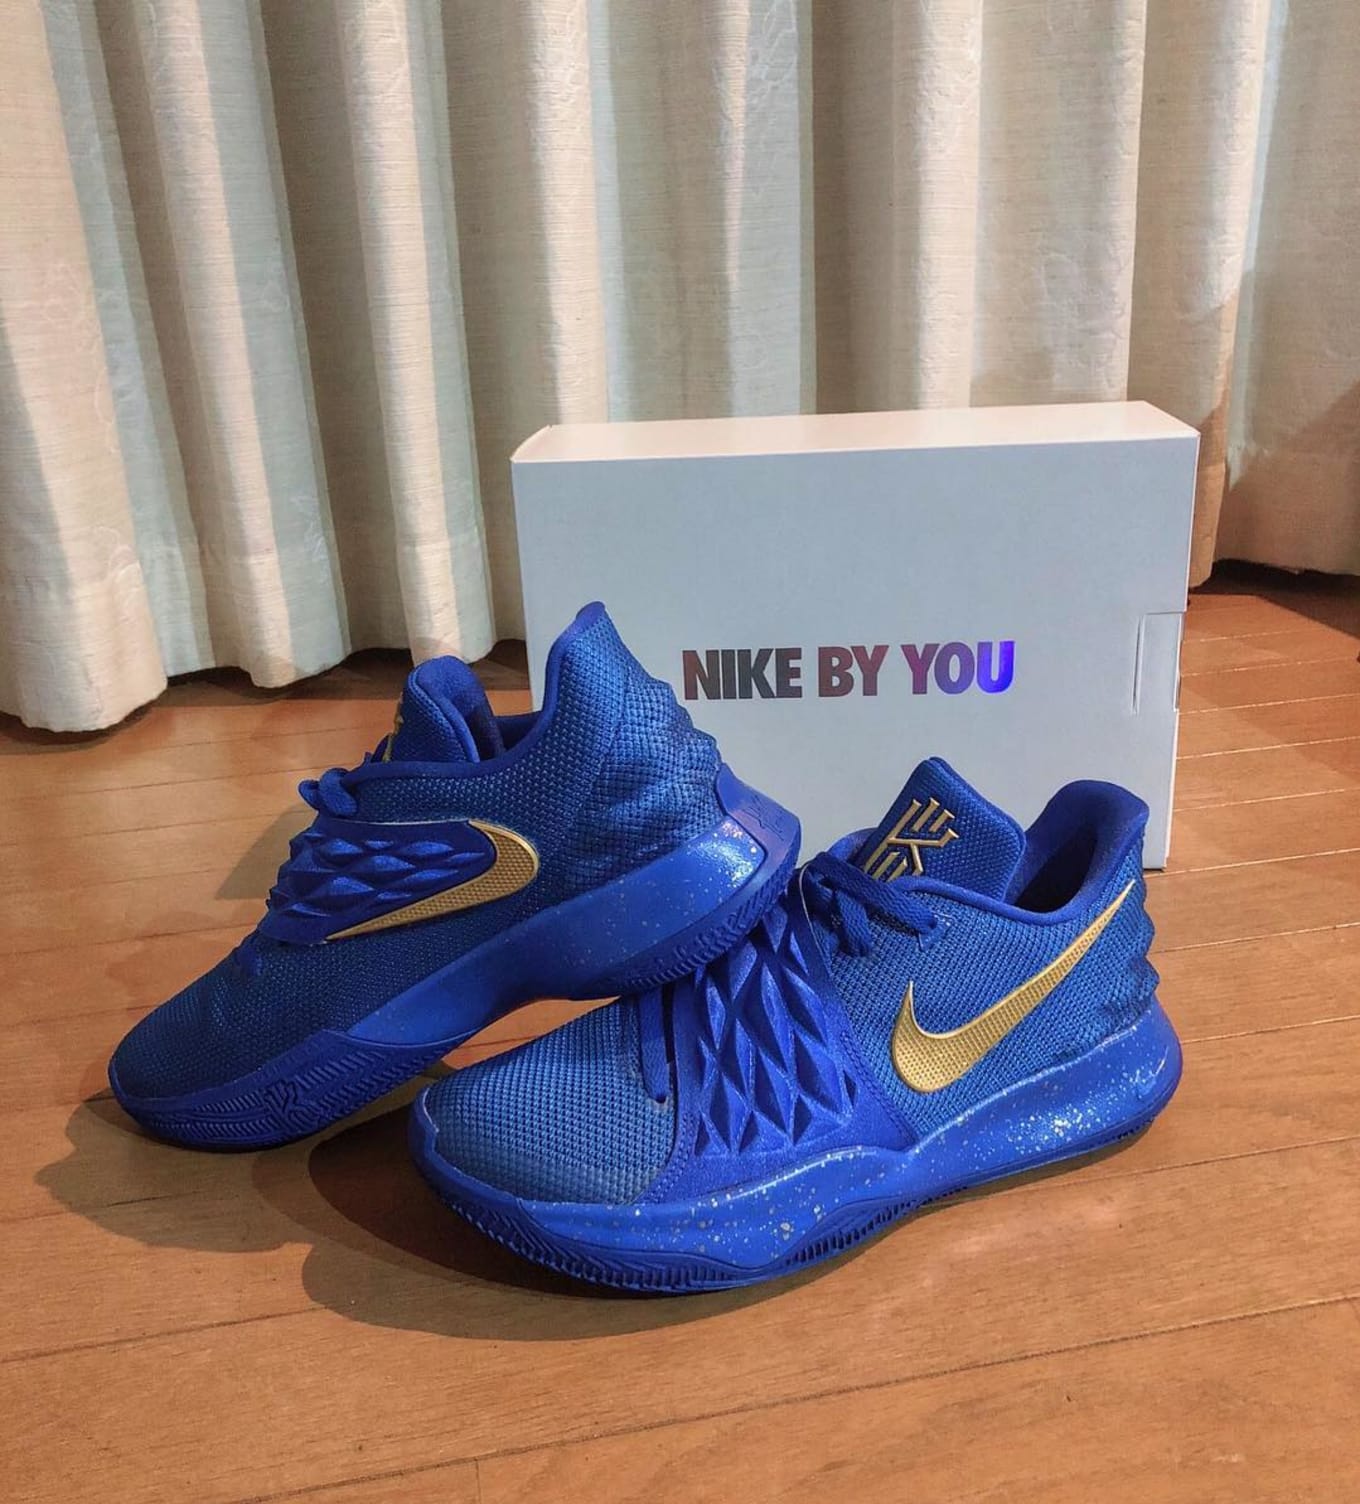 NIKEiD Kyrie Low Designs | Sole Collector